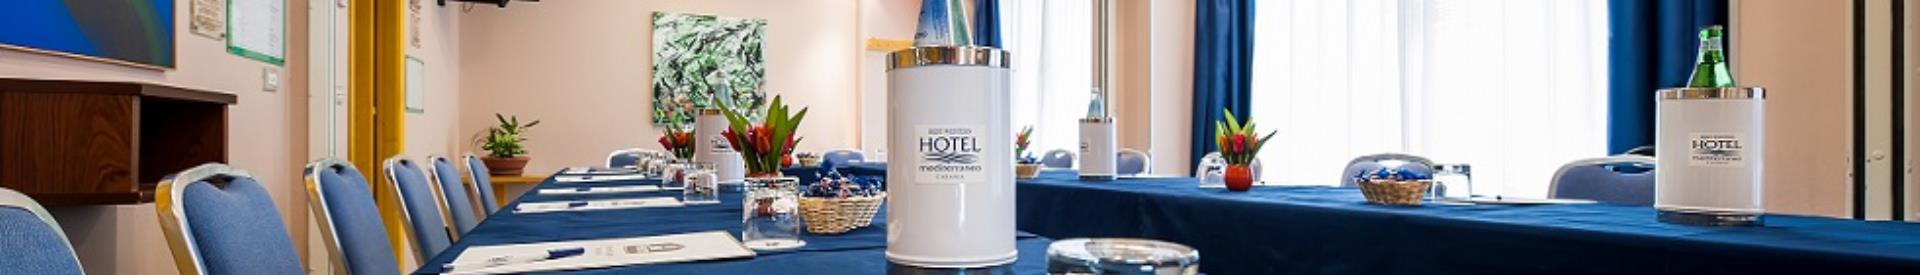 Hotel Mediterraneo, Hotel 3 star hotel in Catania, has equipped meeting rooms for your conferences